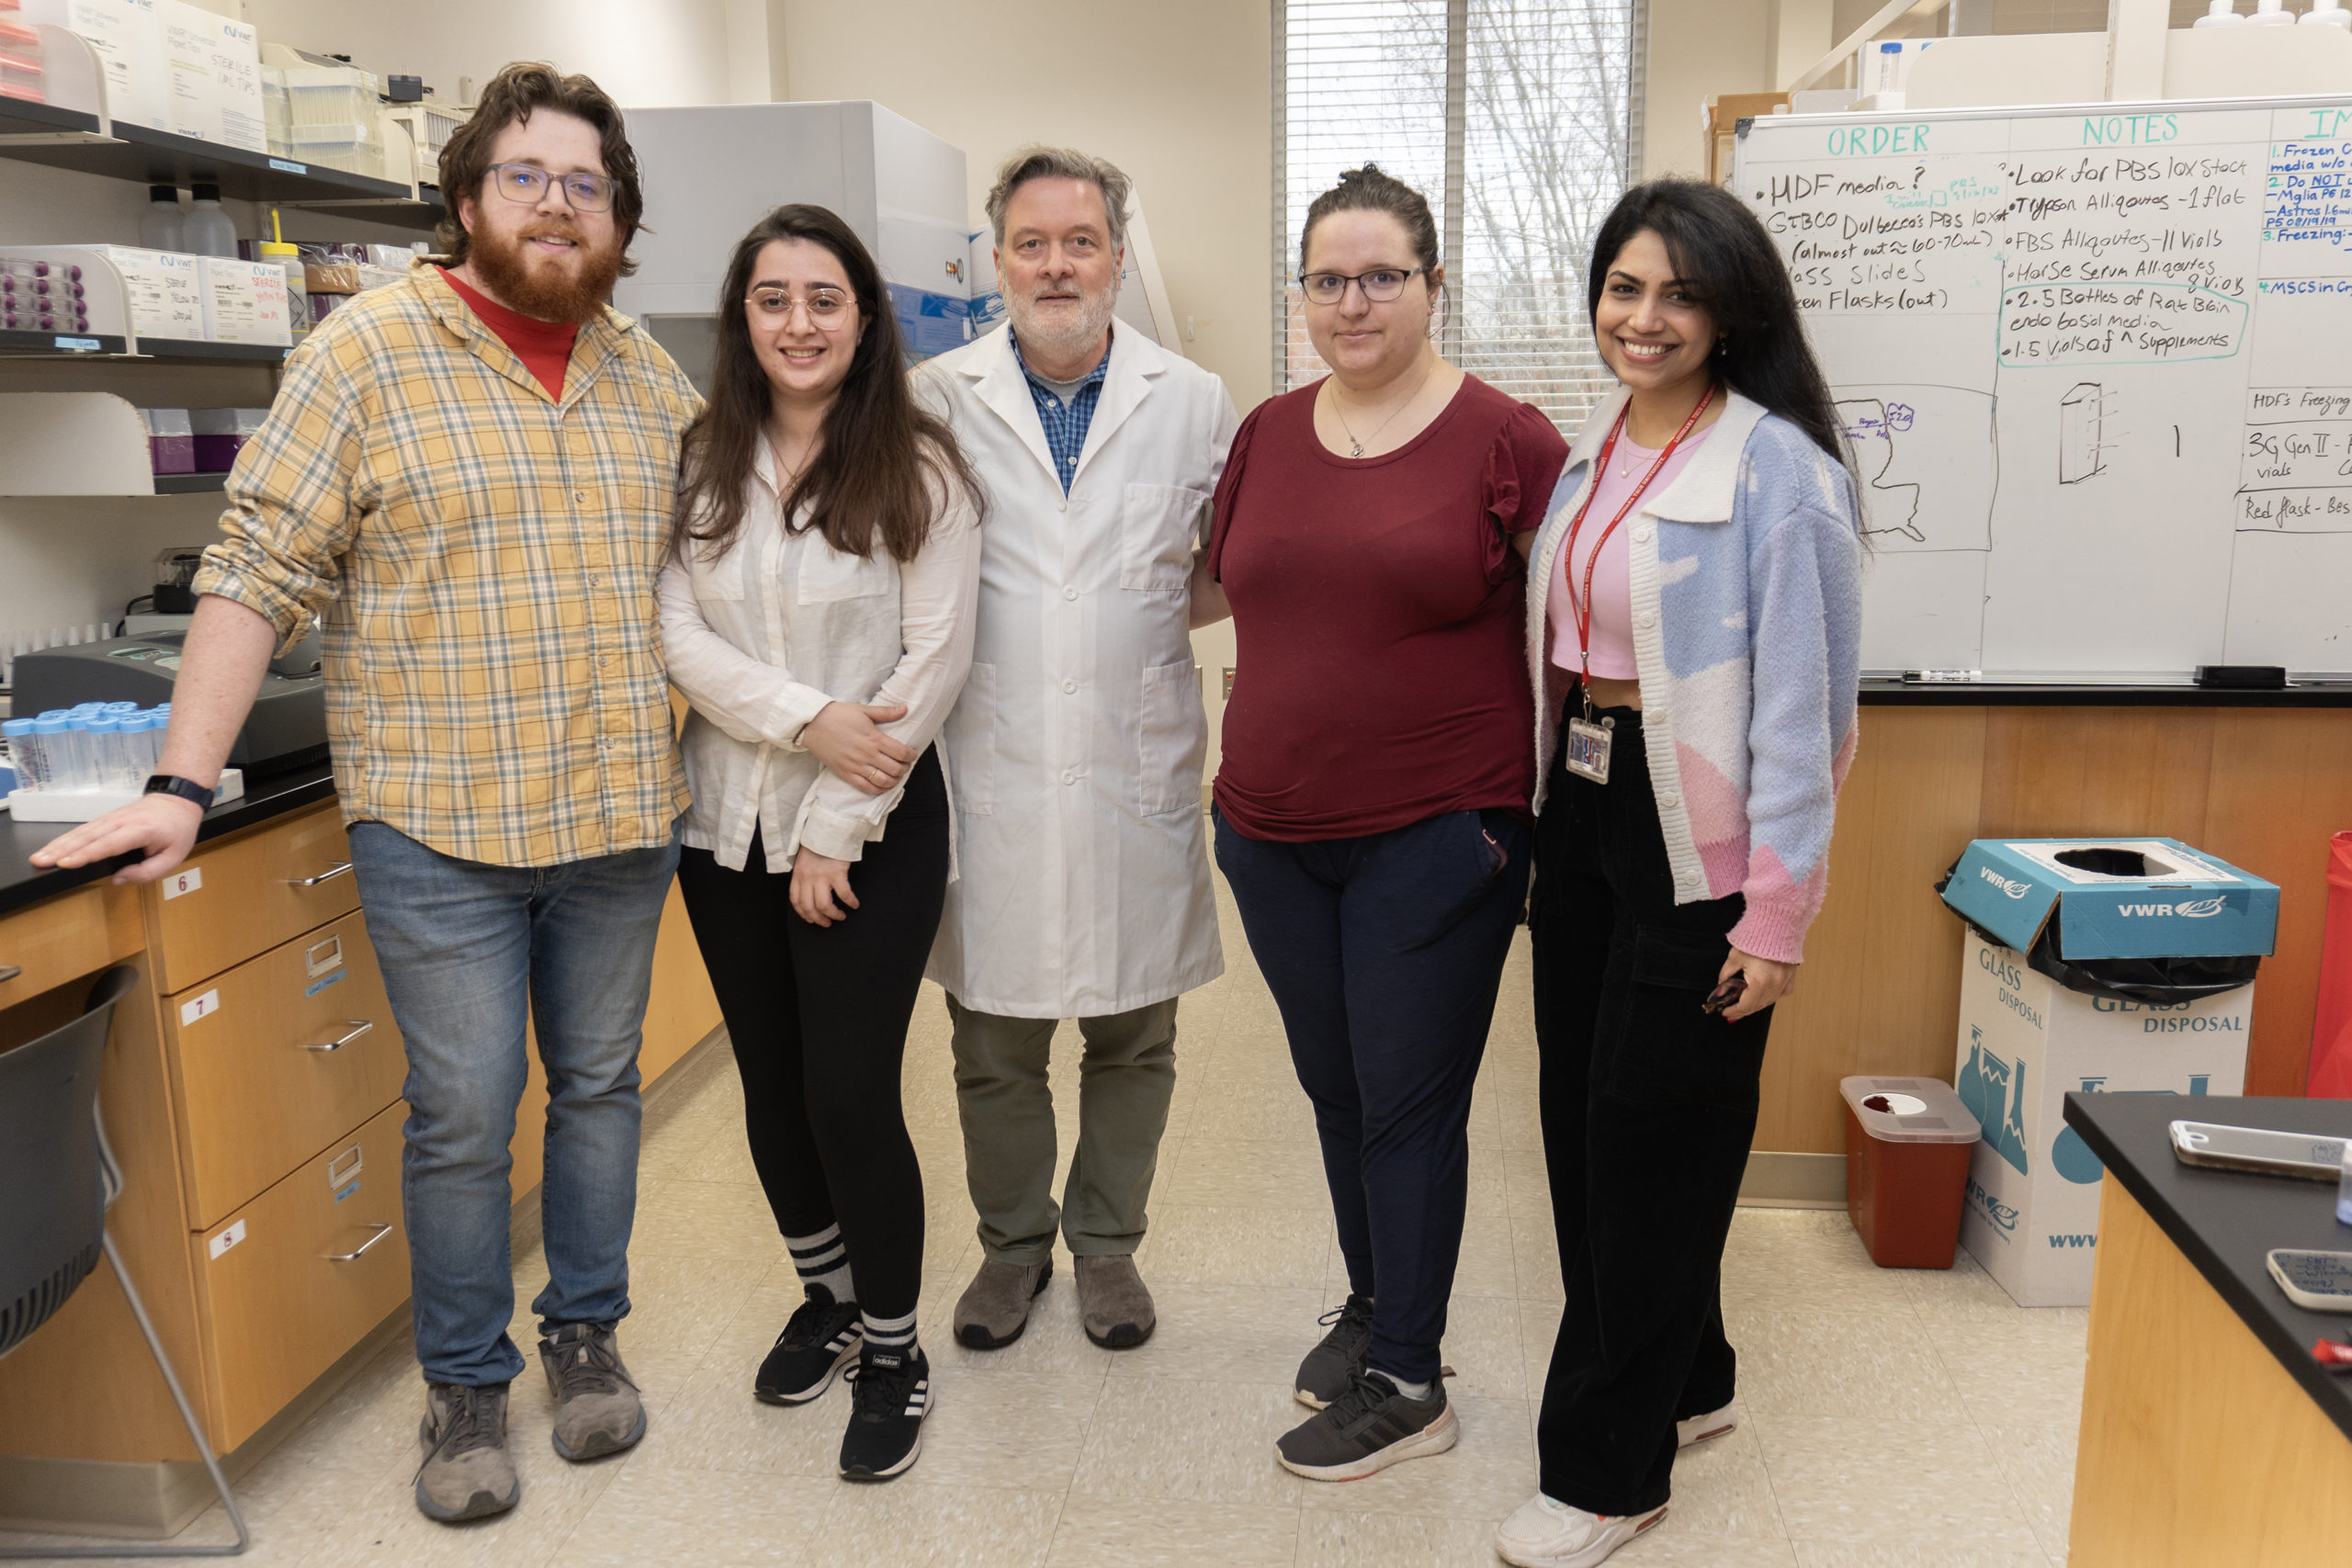 Dr. DeCoster and his student team